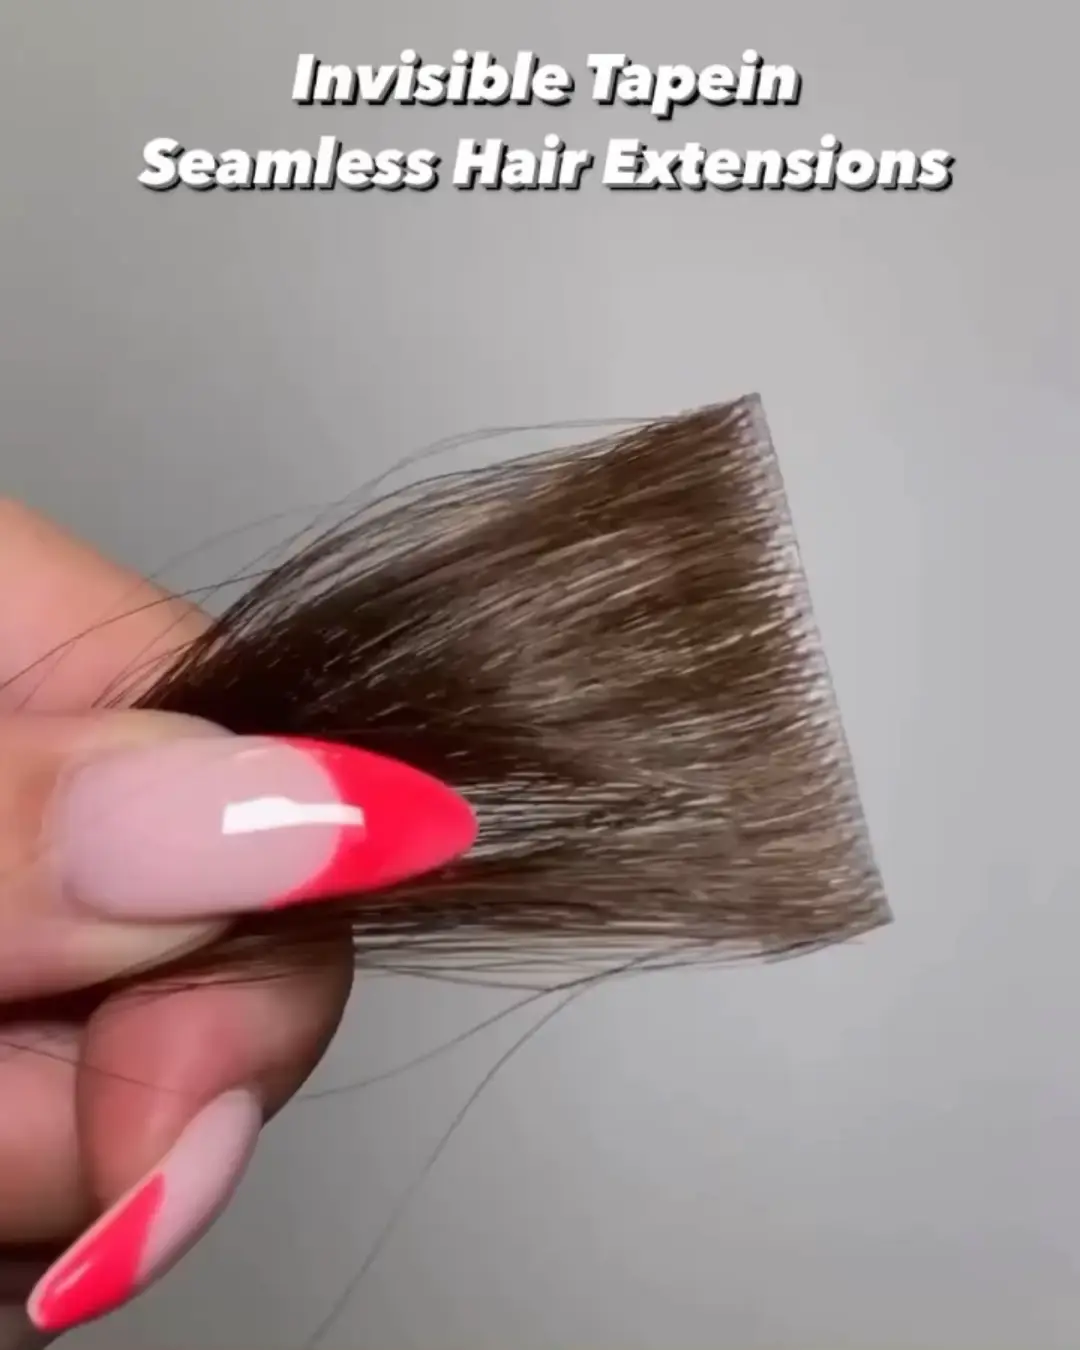 Seamless hair extensions, Video published by Seatyle Hair